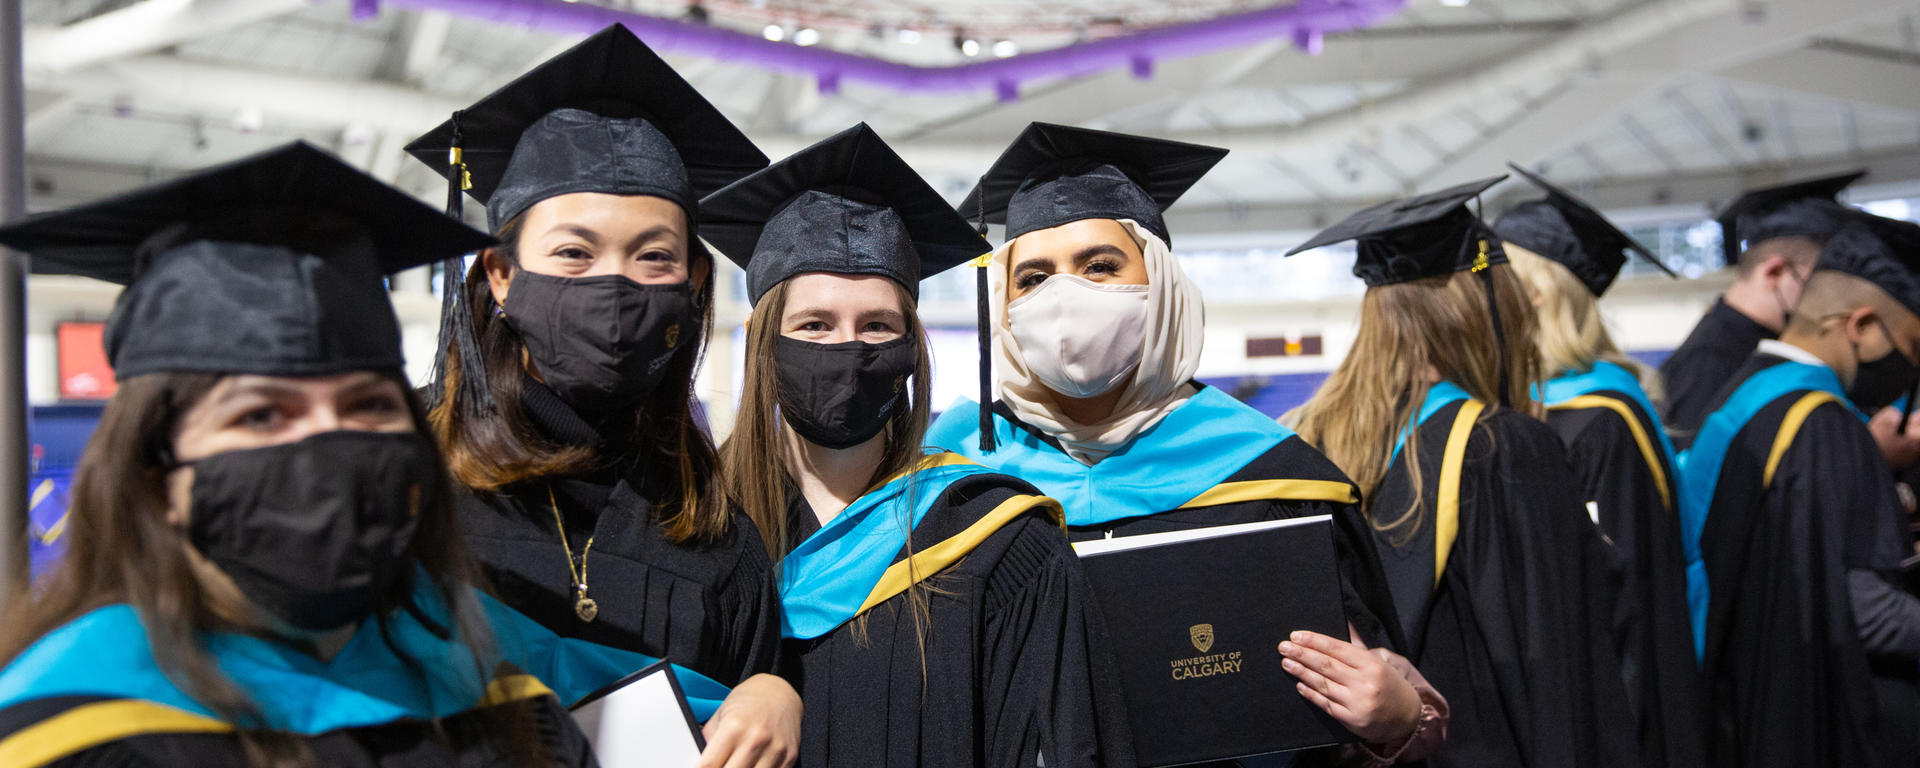 Convocation with masks